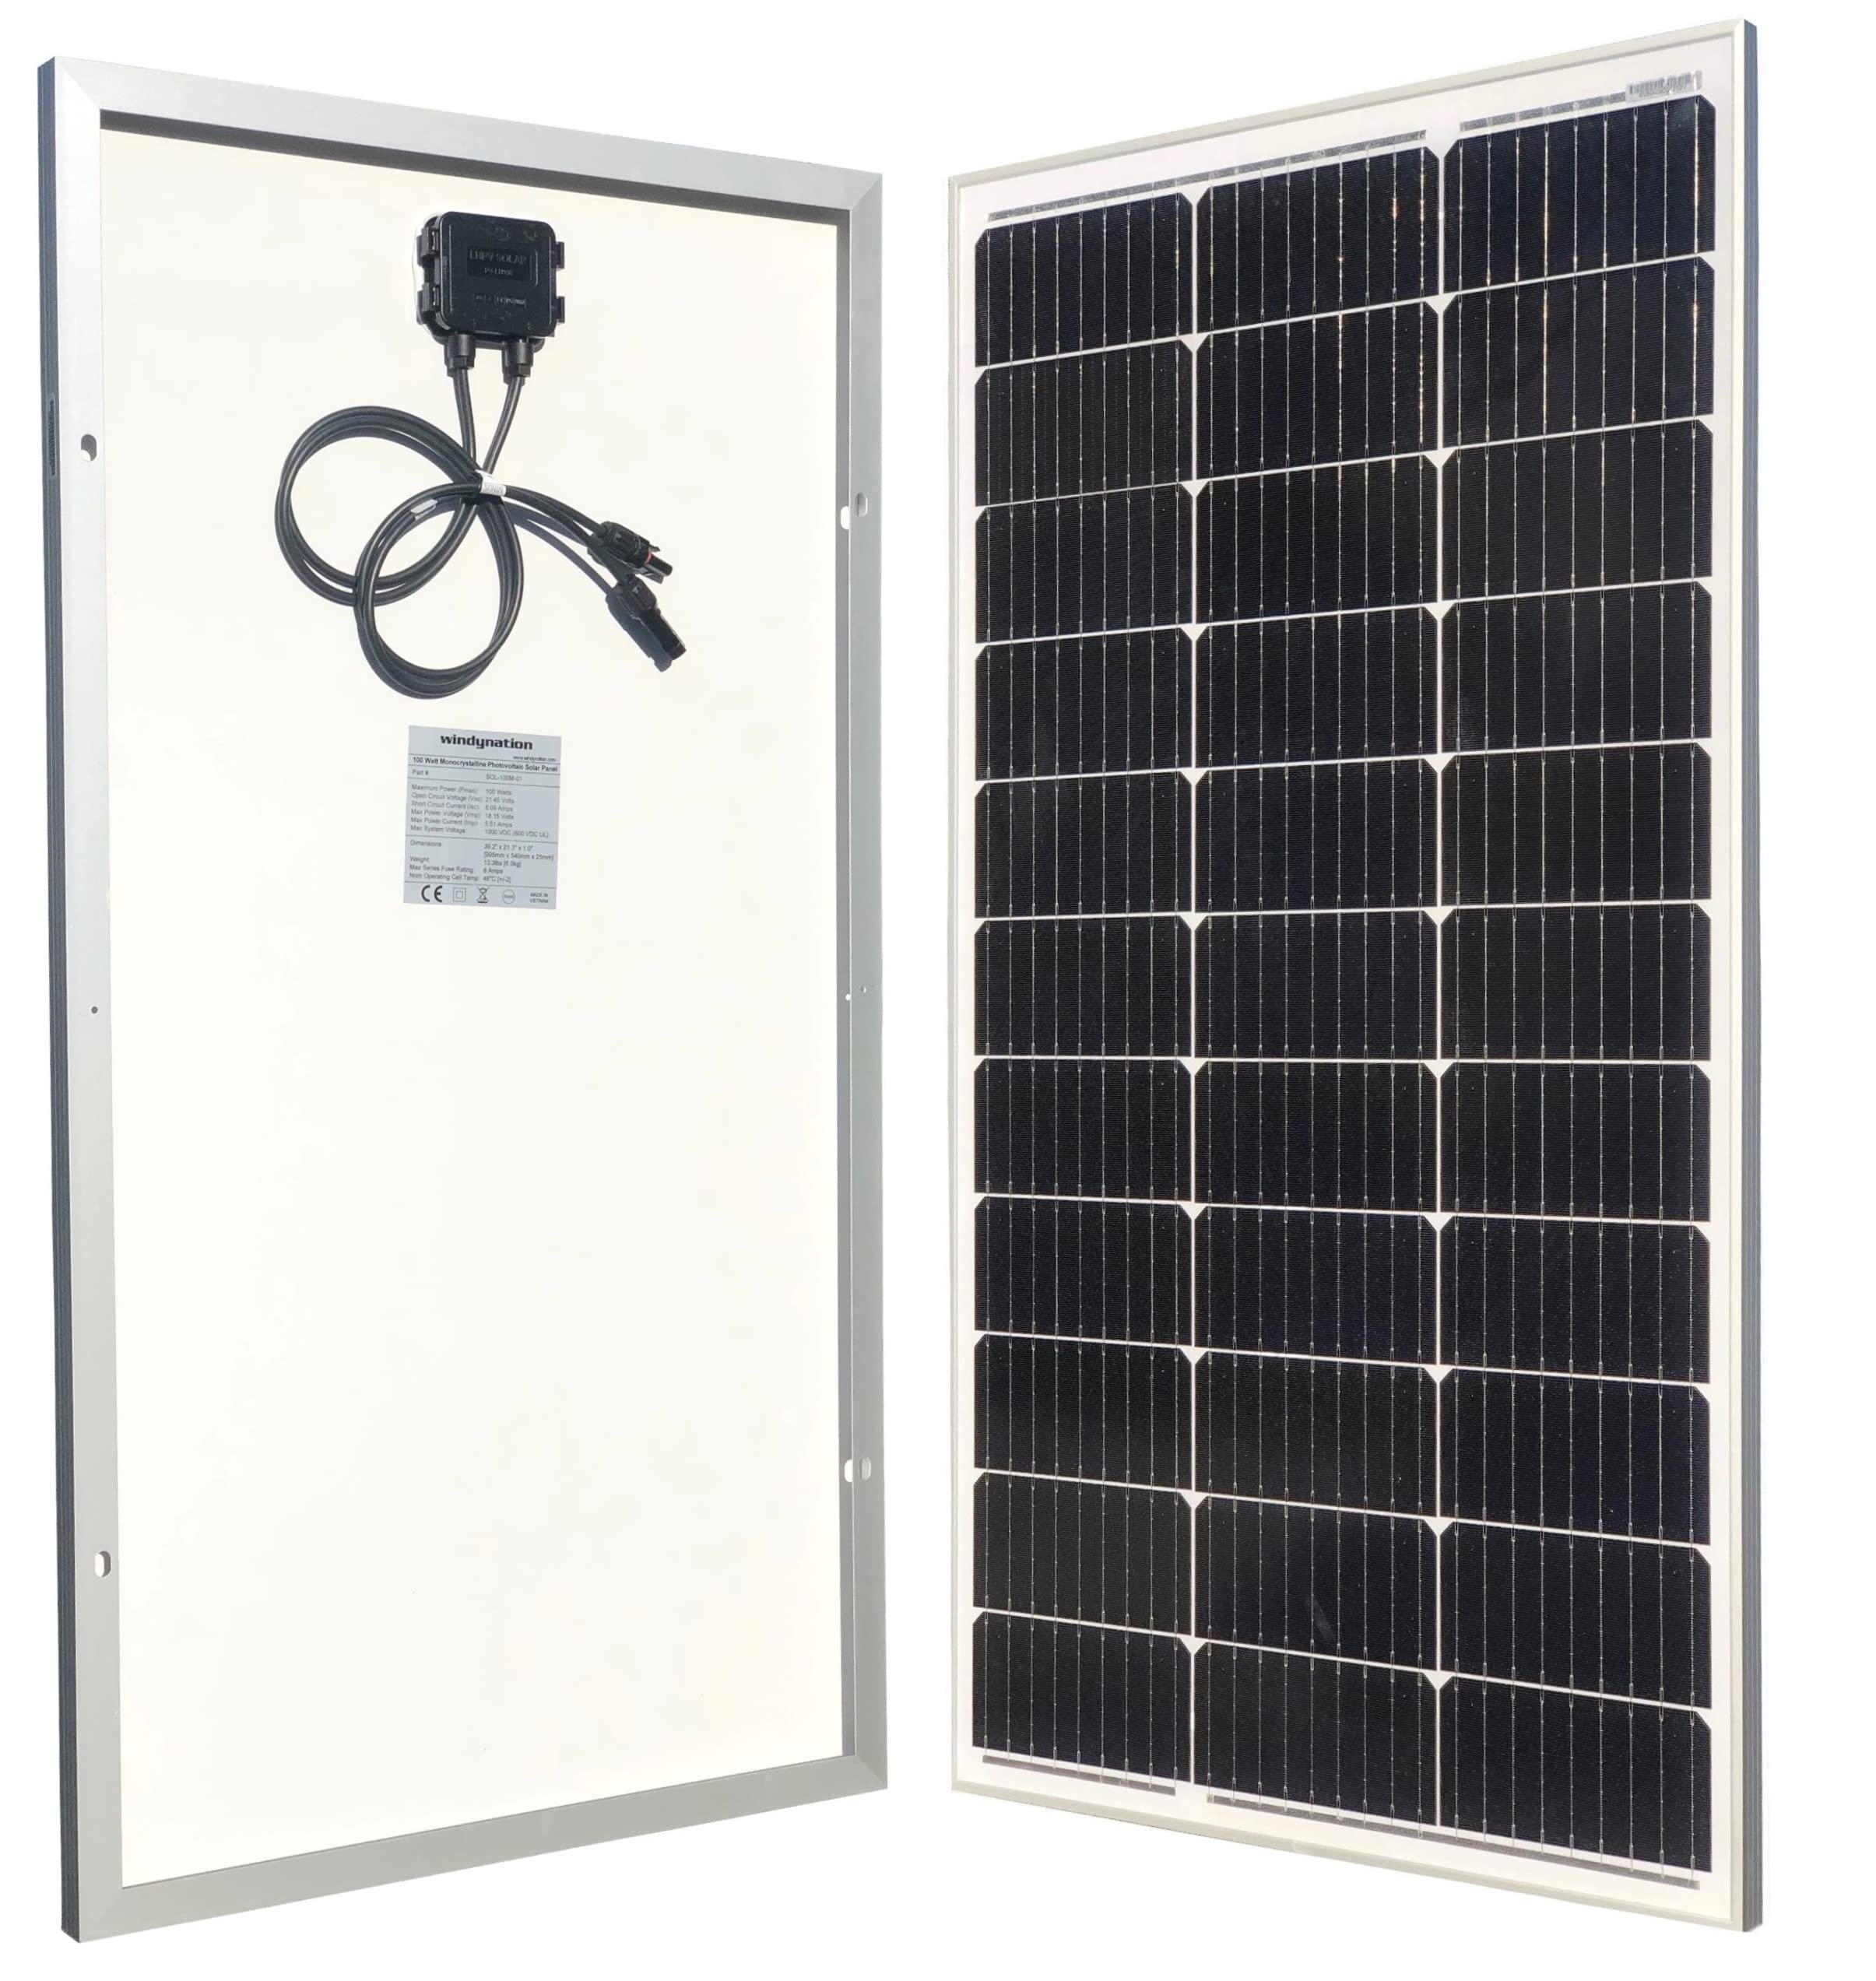 WindyNation 200 Watt Monocrystalline Solar Panel Off-Grid Kit with LCD PWM Charge Controller + Solar Cable + Connectors + Mounting Brackets